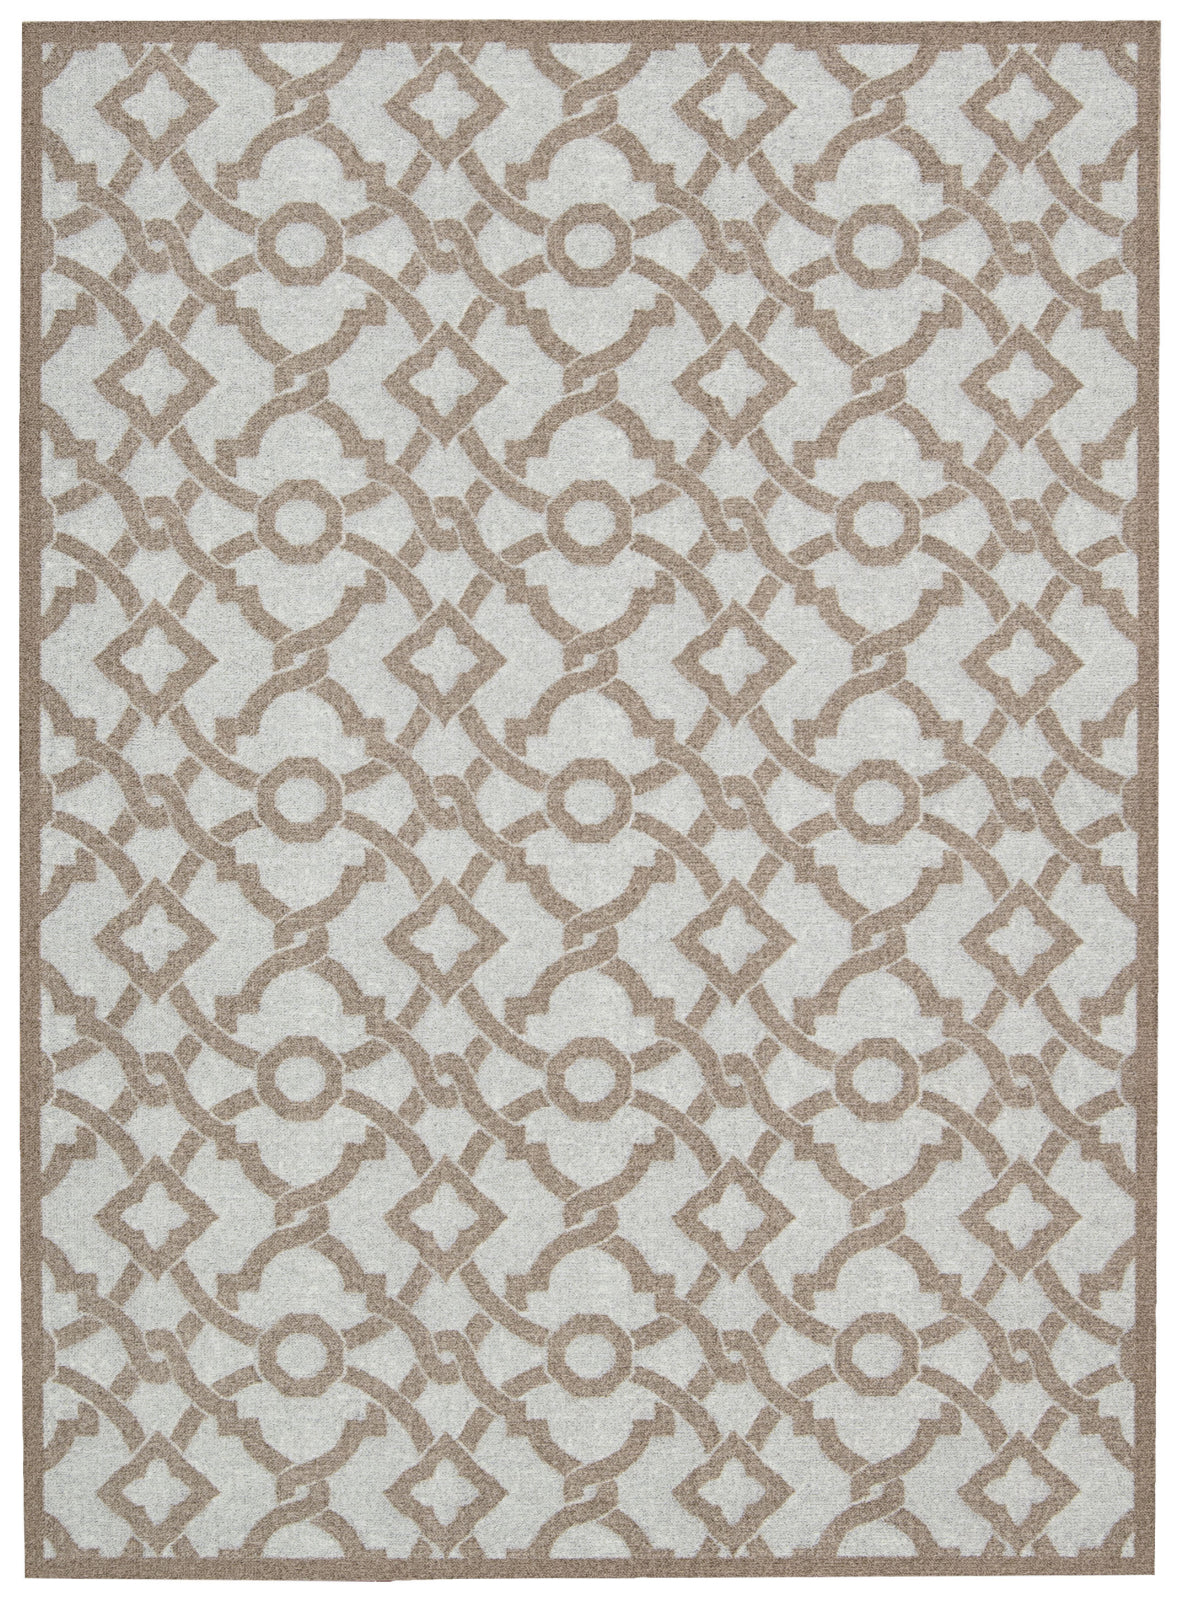 Nourison Treasures WTR01 Artistic Twist Early Grey Area Rug by Waverly main image